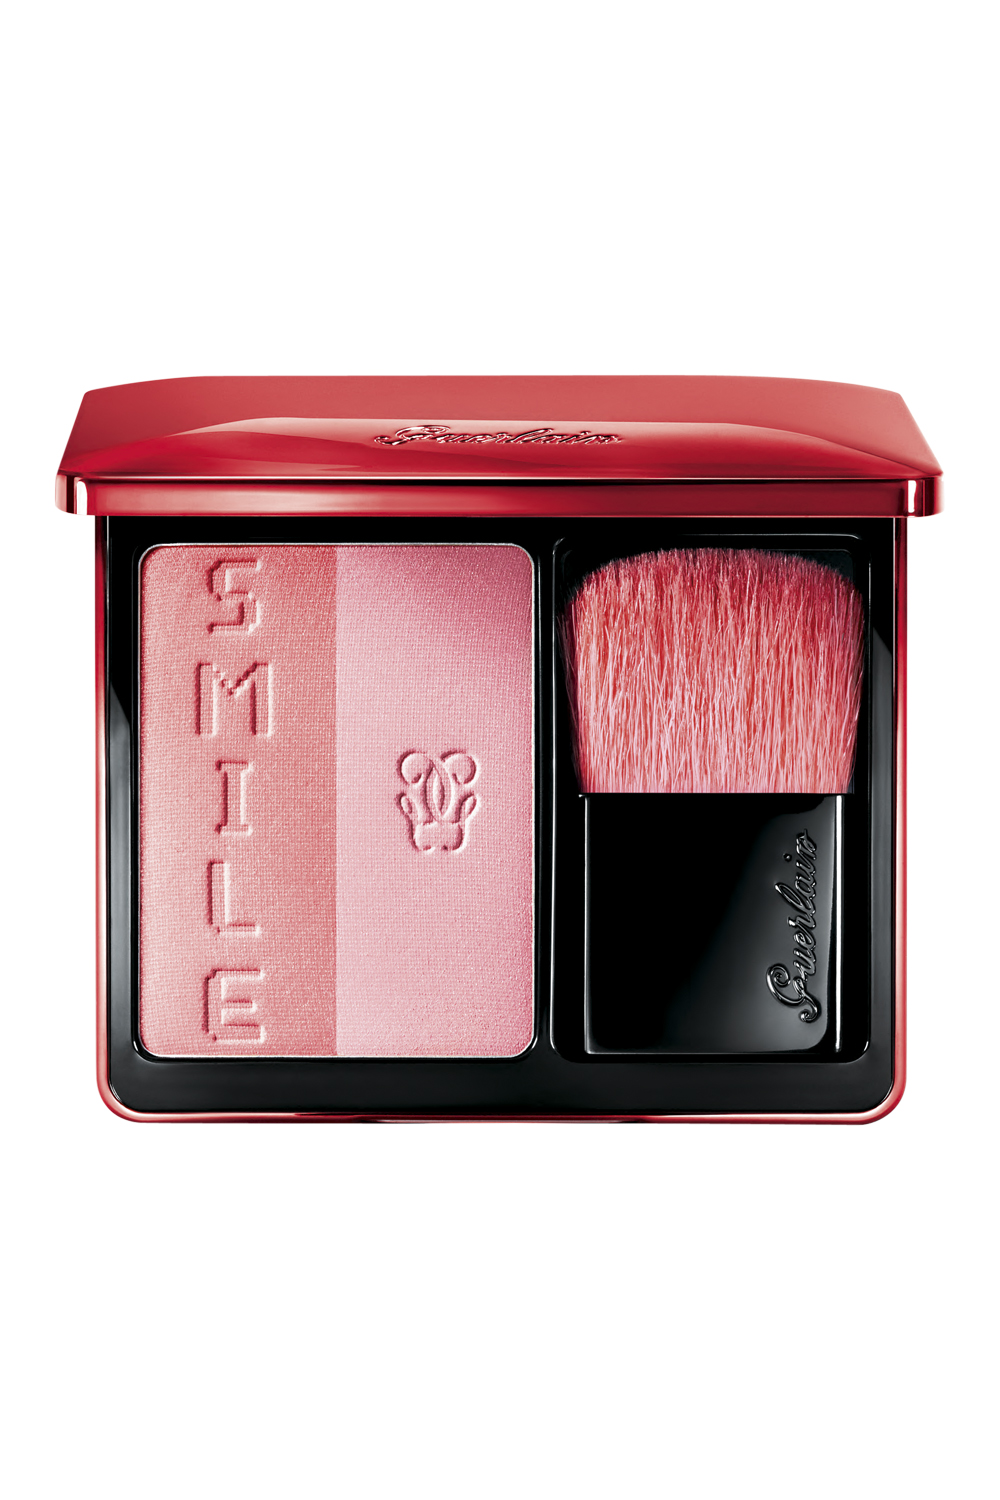 BLUSHING BEAUTY Guerlain Rose Aux Joues Blush Duo in Smile, $83.